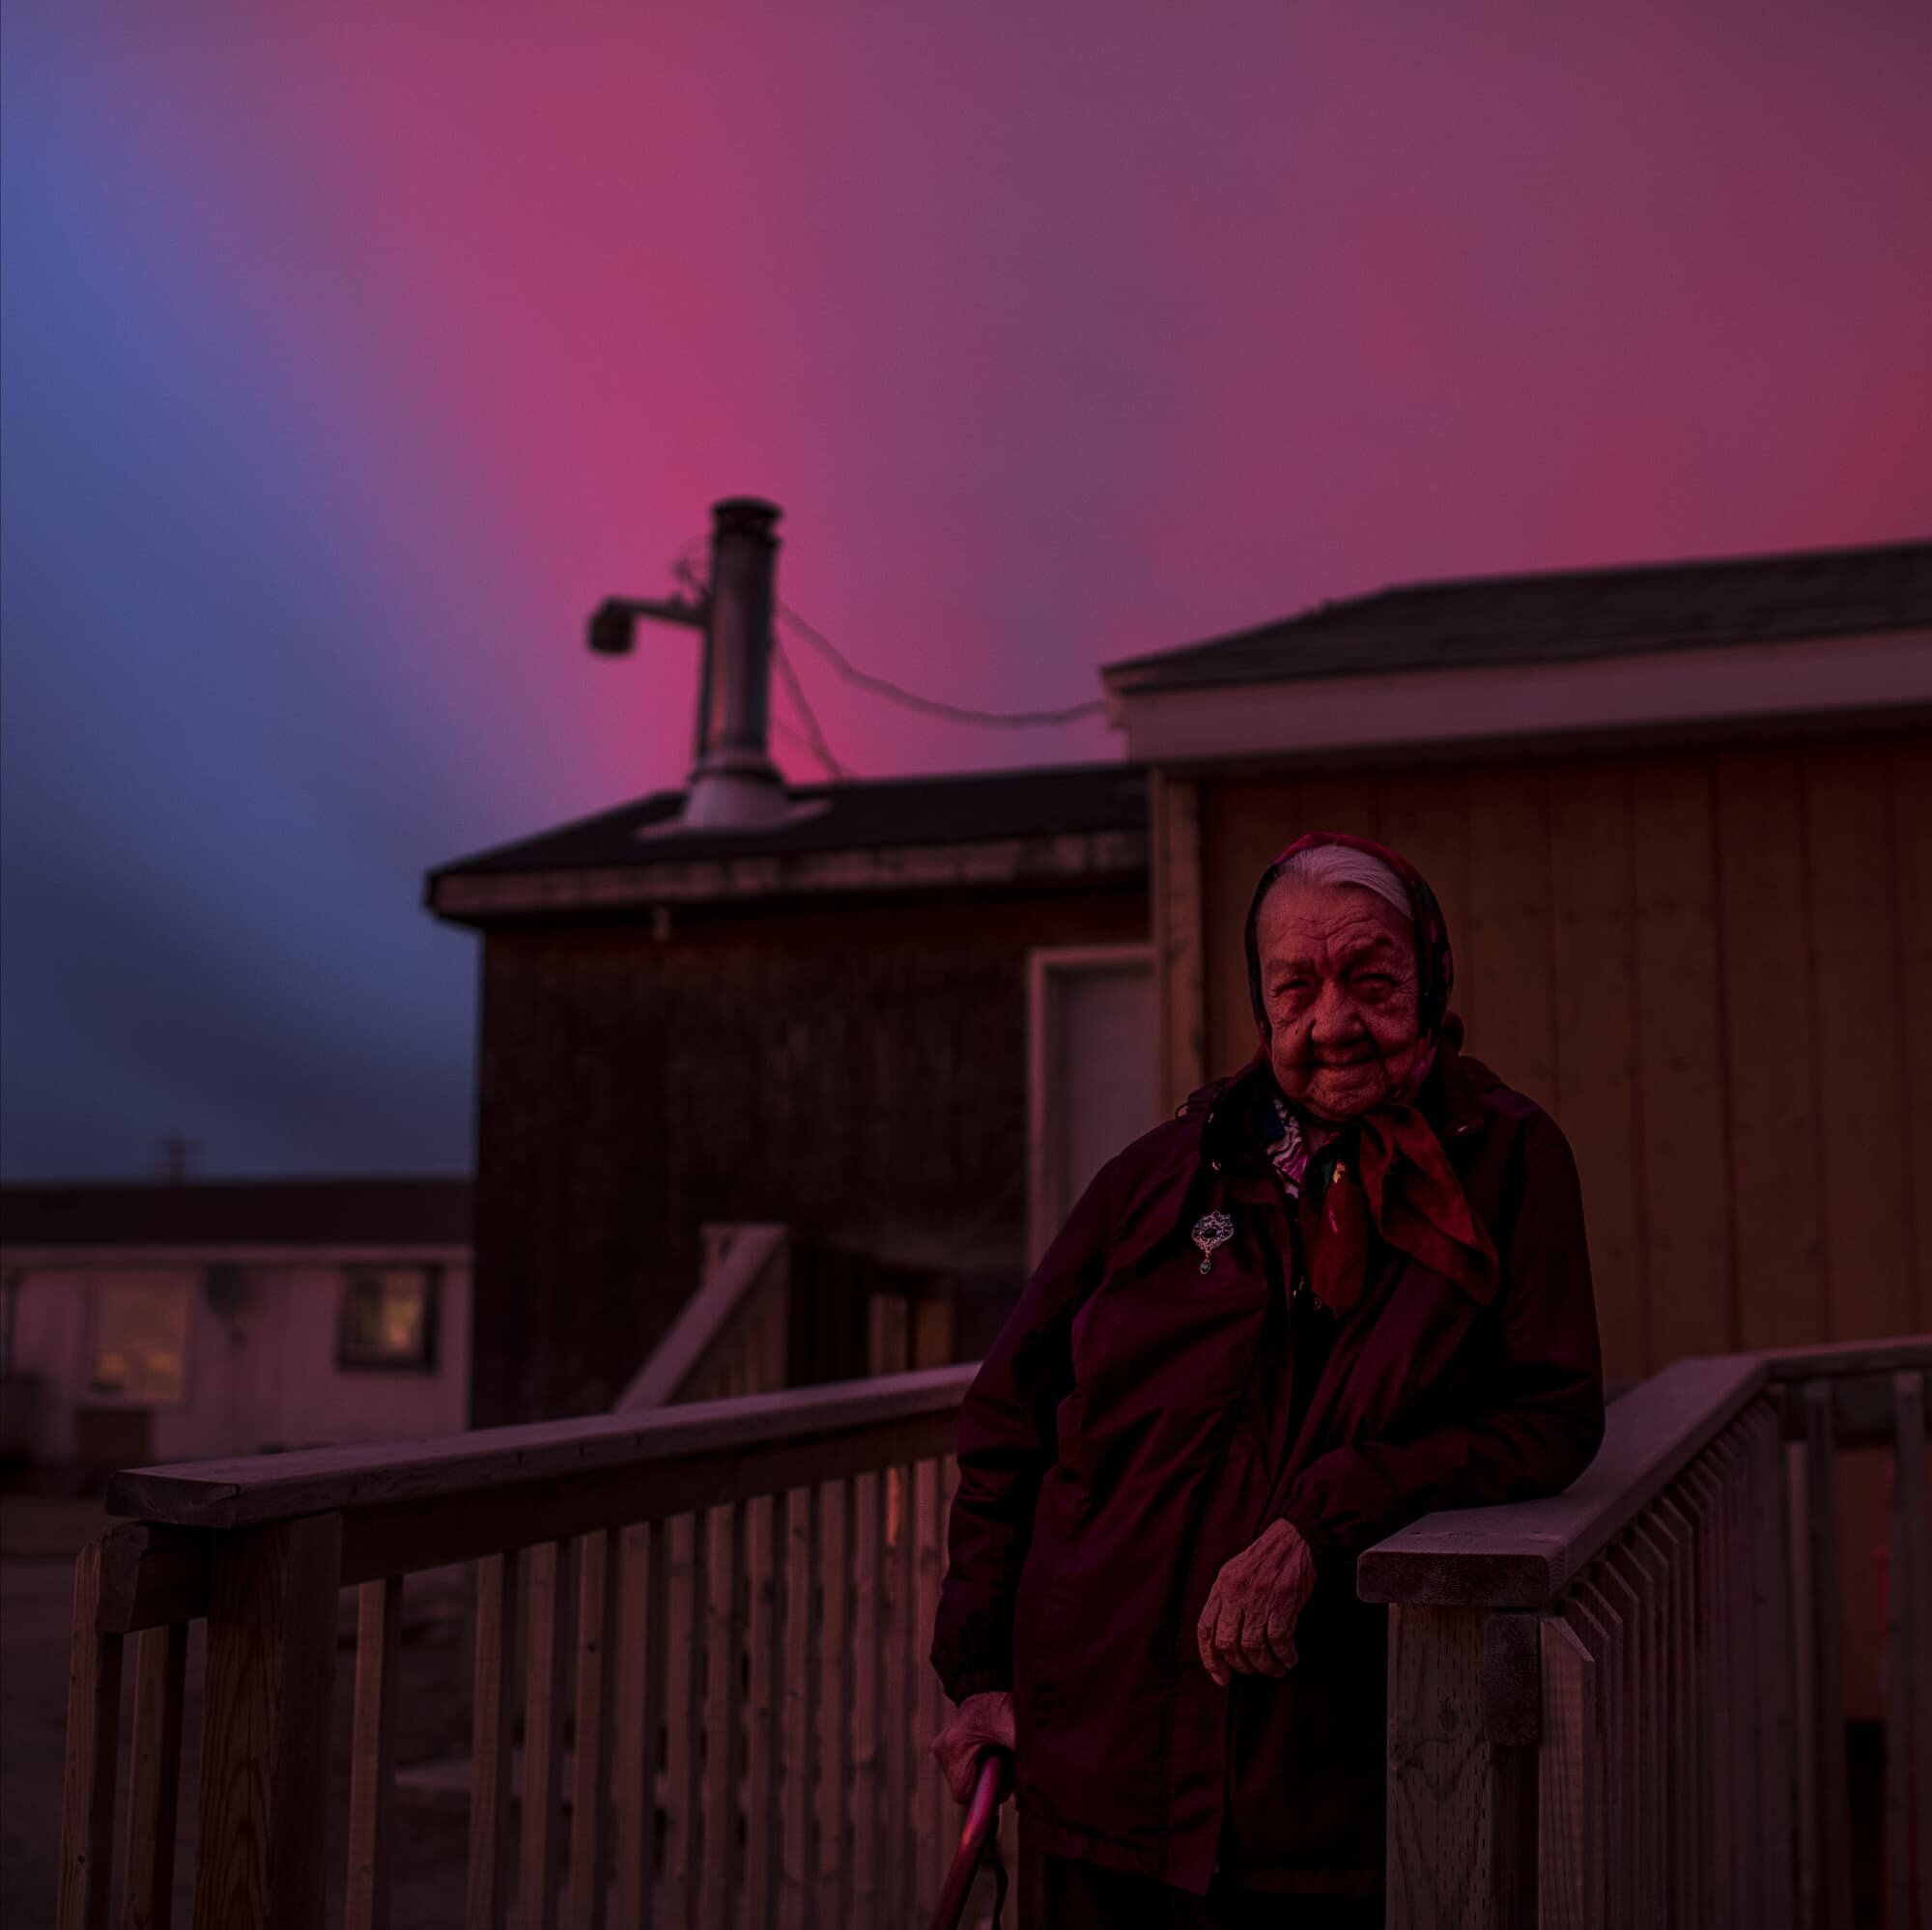 Tataskweyak Cree Nation Elder Betsy Flett stands outside her home in Split Lake. “I have no hope for the future,” she says. “You won’t be able to live here cause it’s gonna flood. It’s already flooded where our loved ones rest. I tell my kids, ‘When…